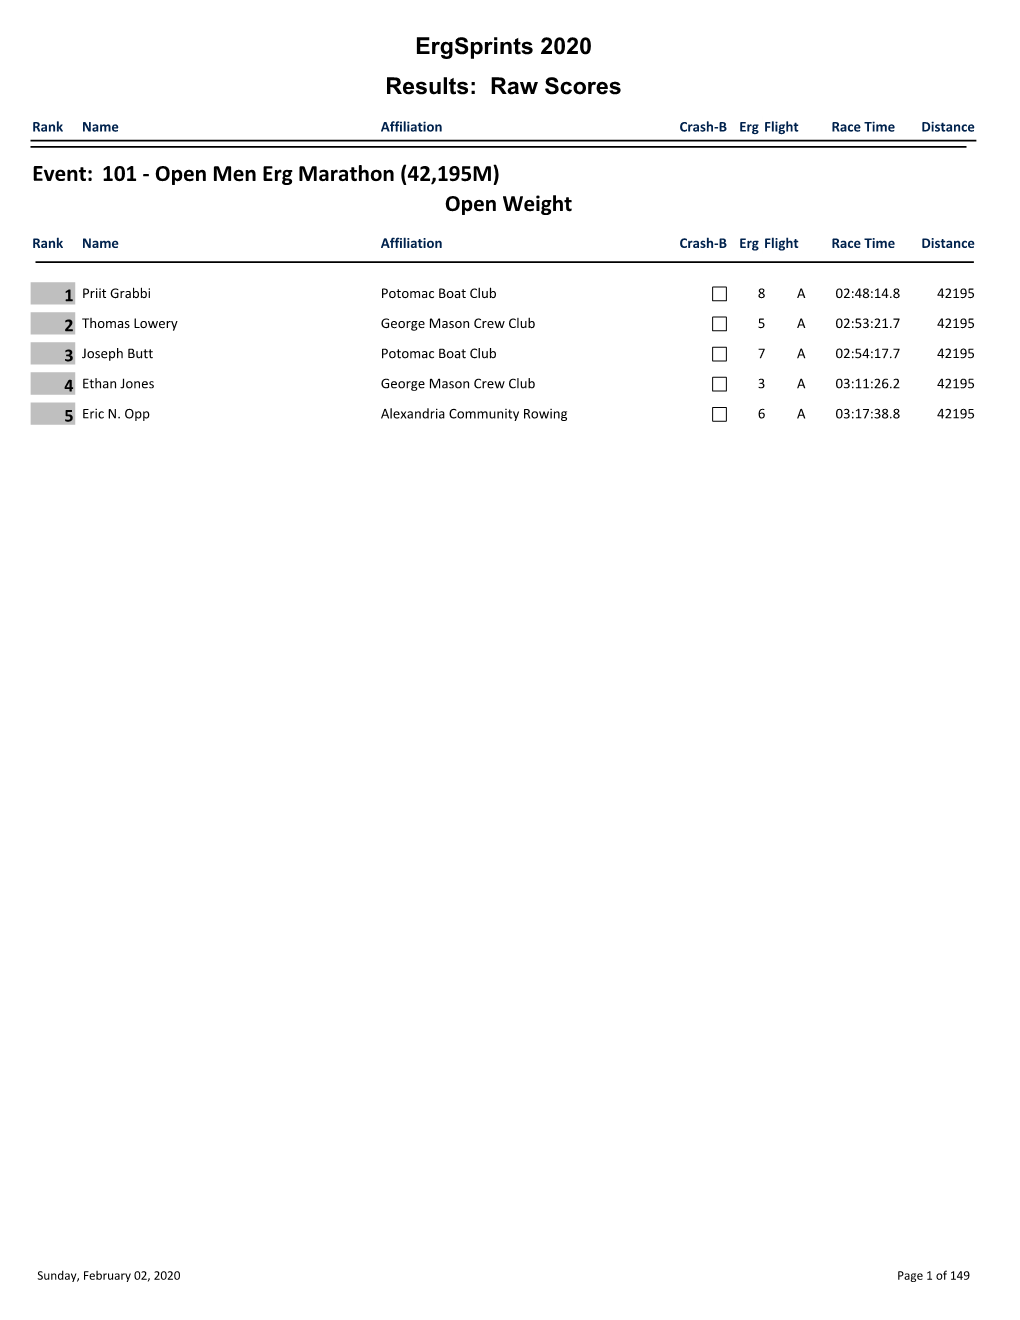 Ergsprints 2020 Results: Raw Scores Open Weight Event